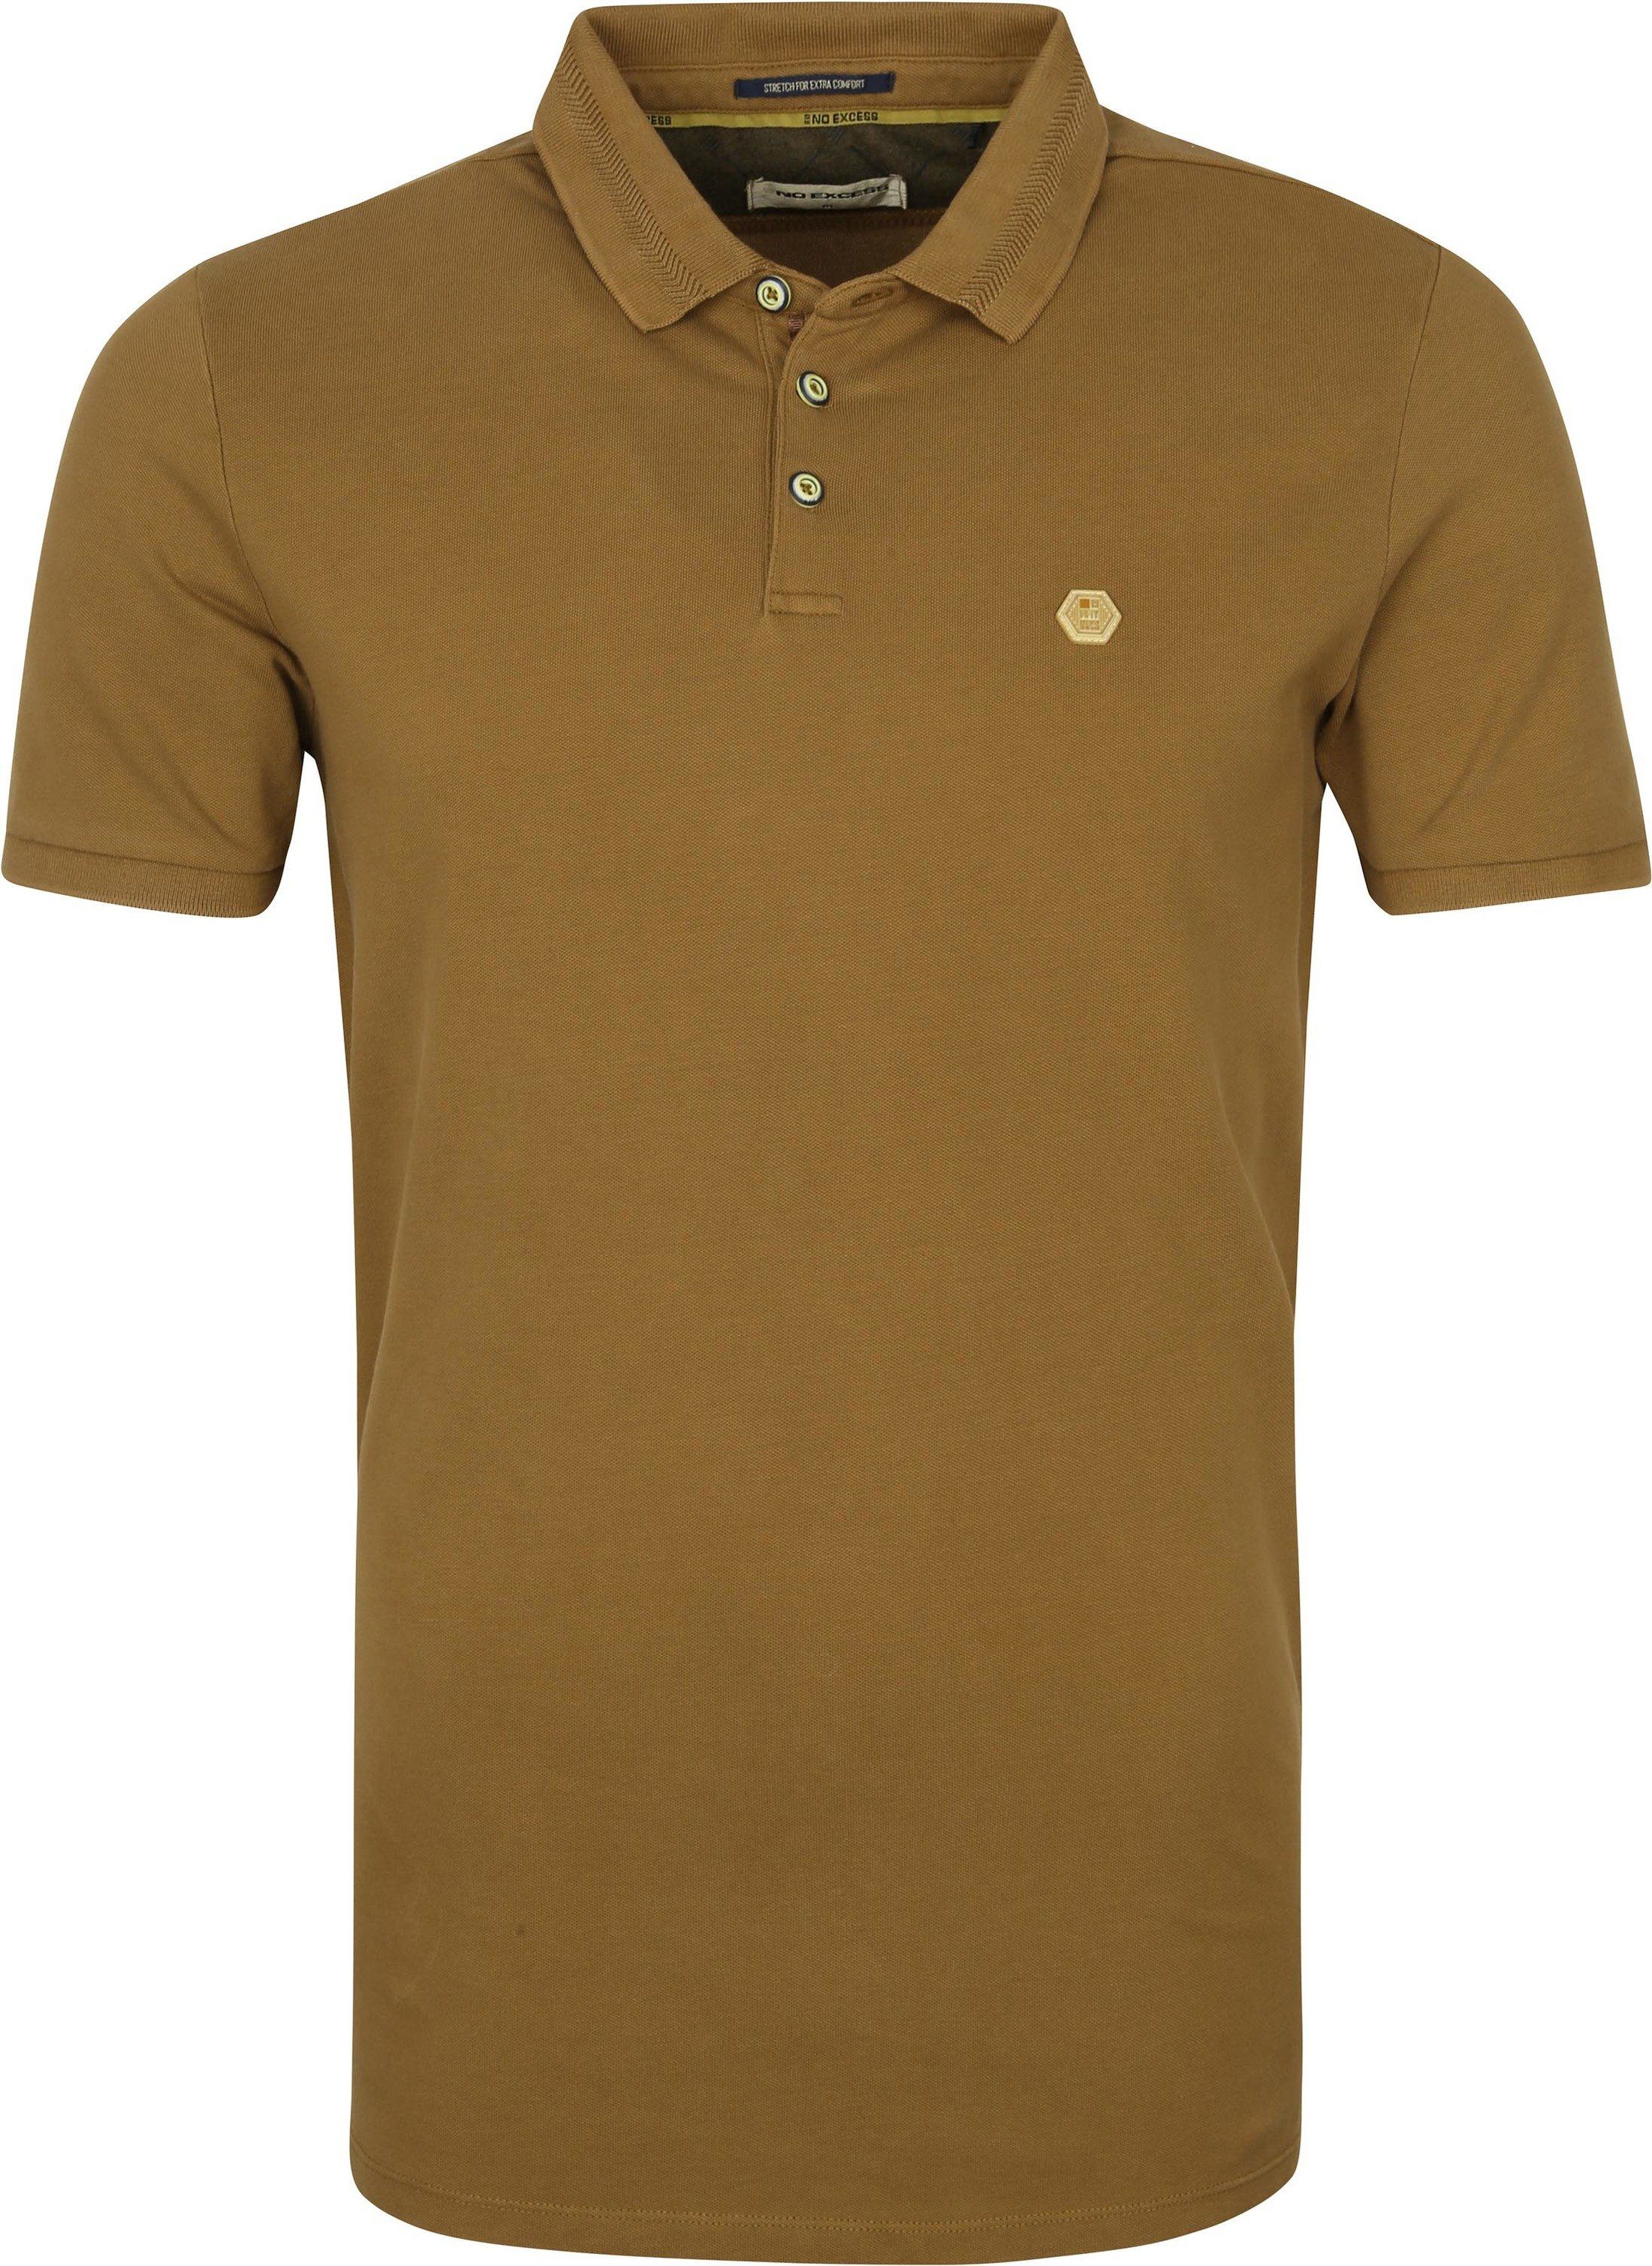 No-Excess Polo Shirt Stone Washed Olive Green size M